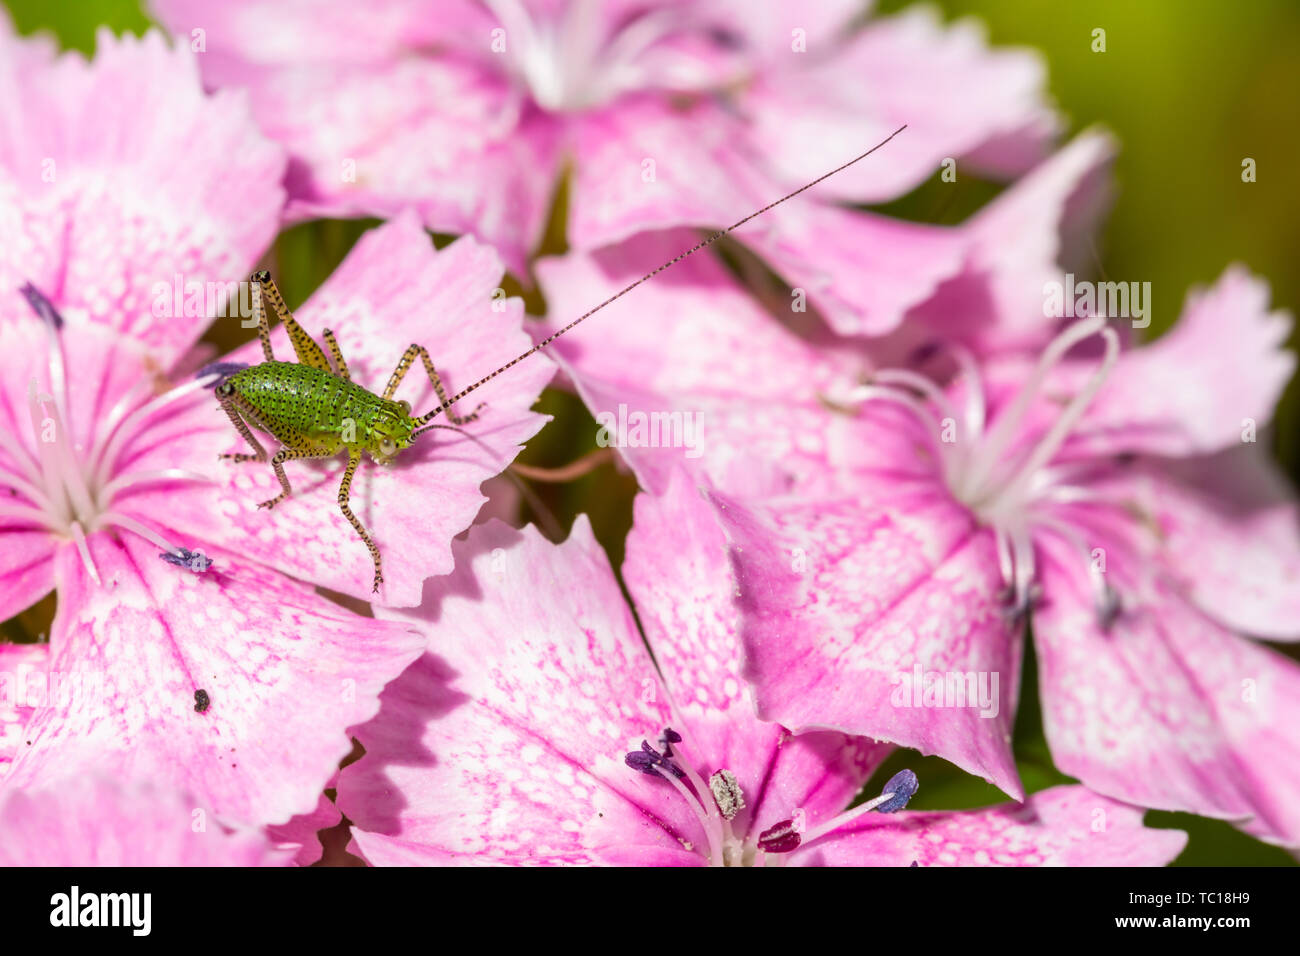 Macro photograph of nymph speckled bush cricket (Leptophyes punctatissima) in profile, perched on Maiden pink flowers. Taken in Poole, Dorset, England Stock Photo